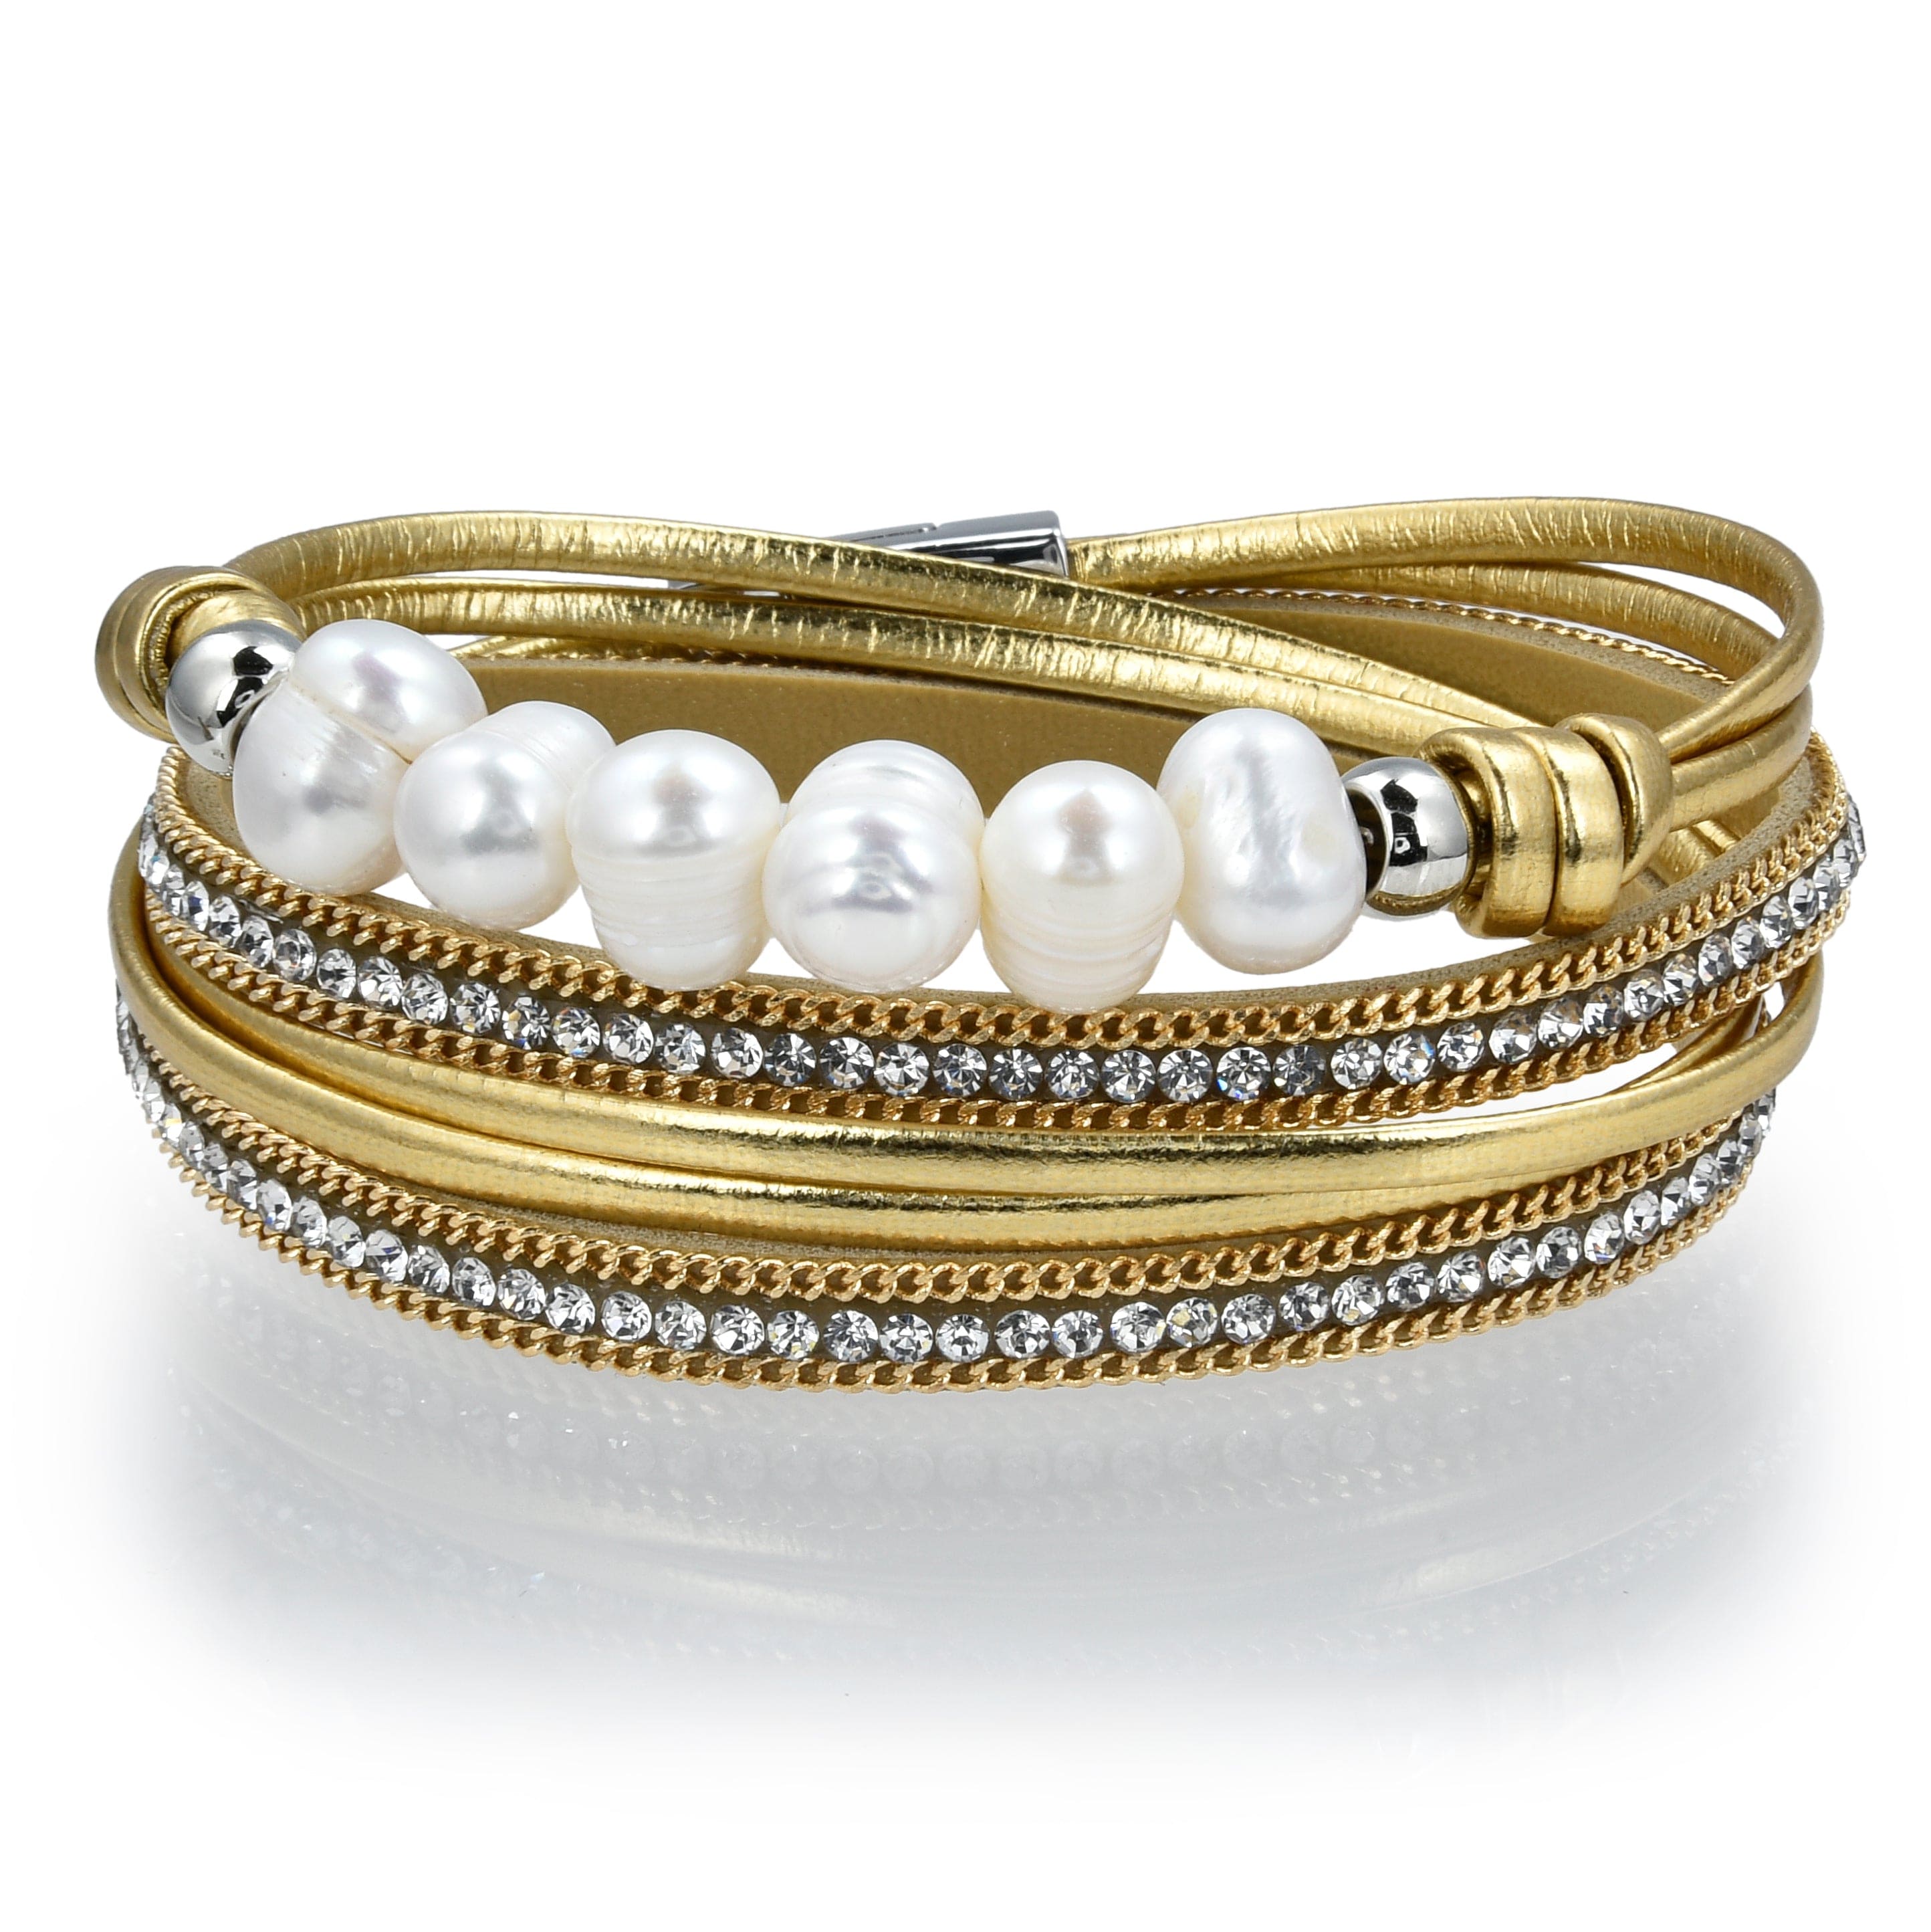 Kalifano Multiwrap Bracelets Multiple Strand Pearl and Diamonds Gold Bracelet with Magnetic Clasp BMW-20-GD